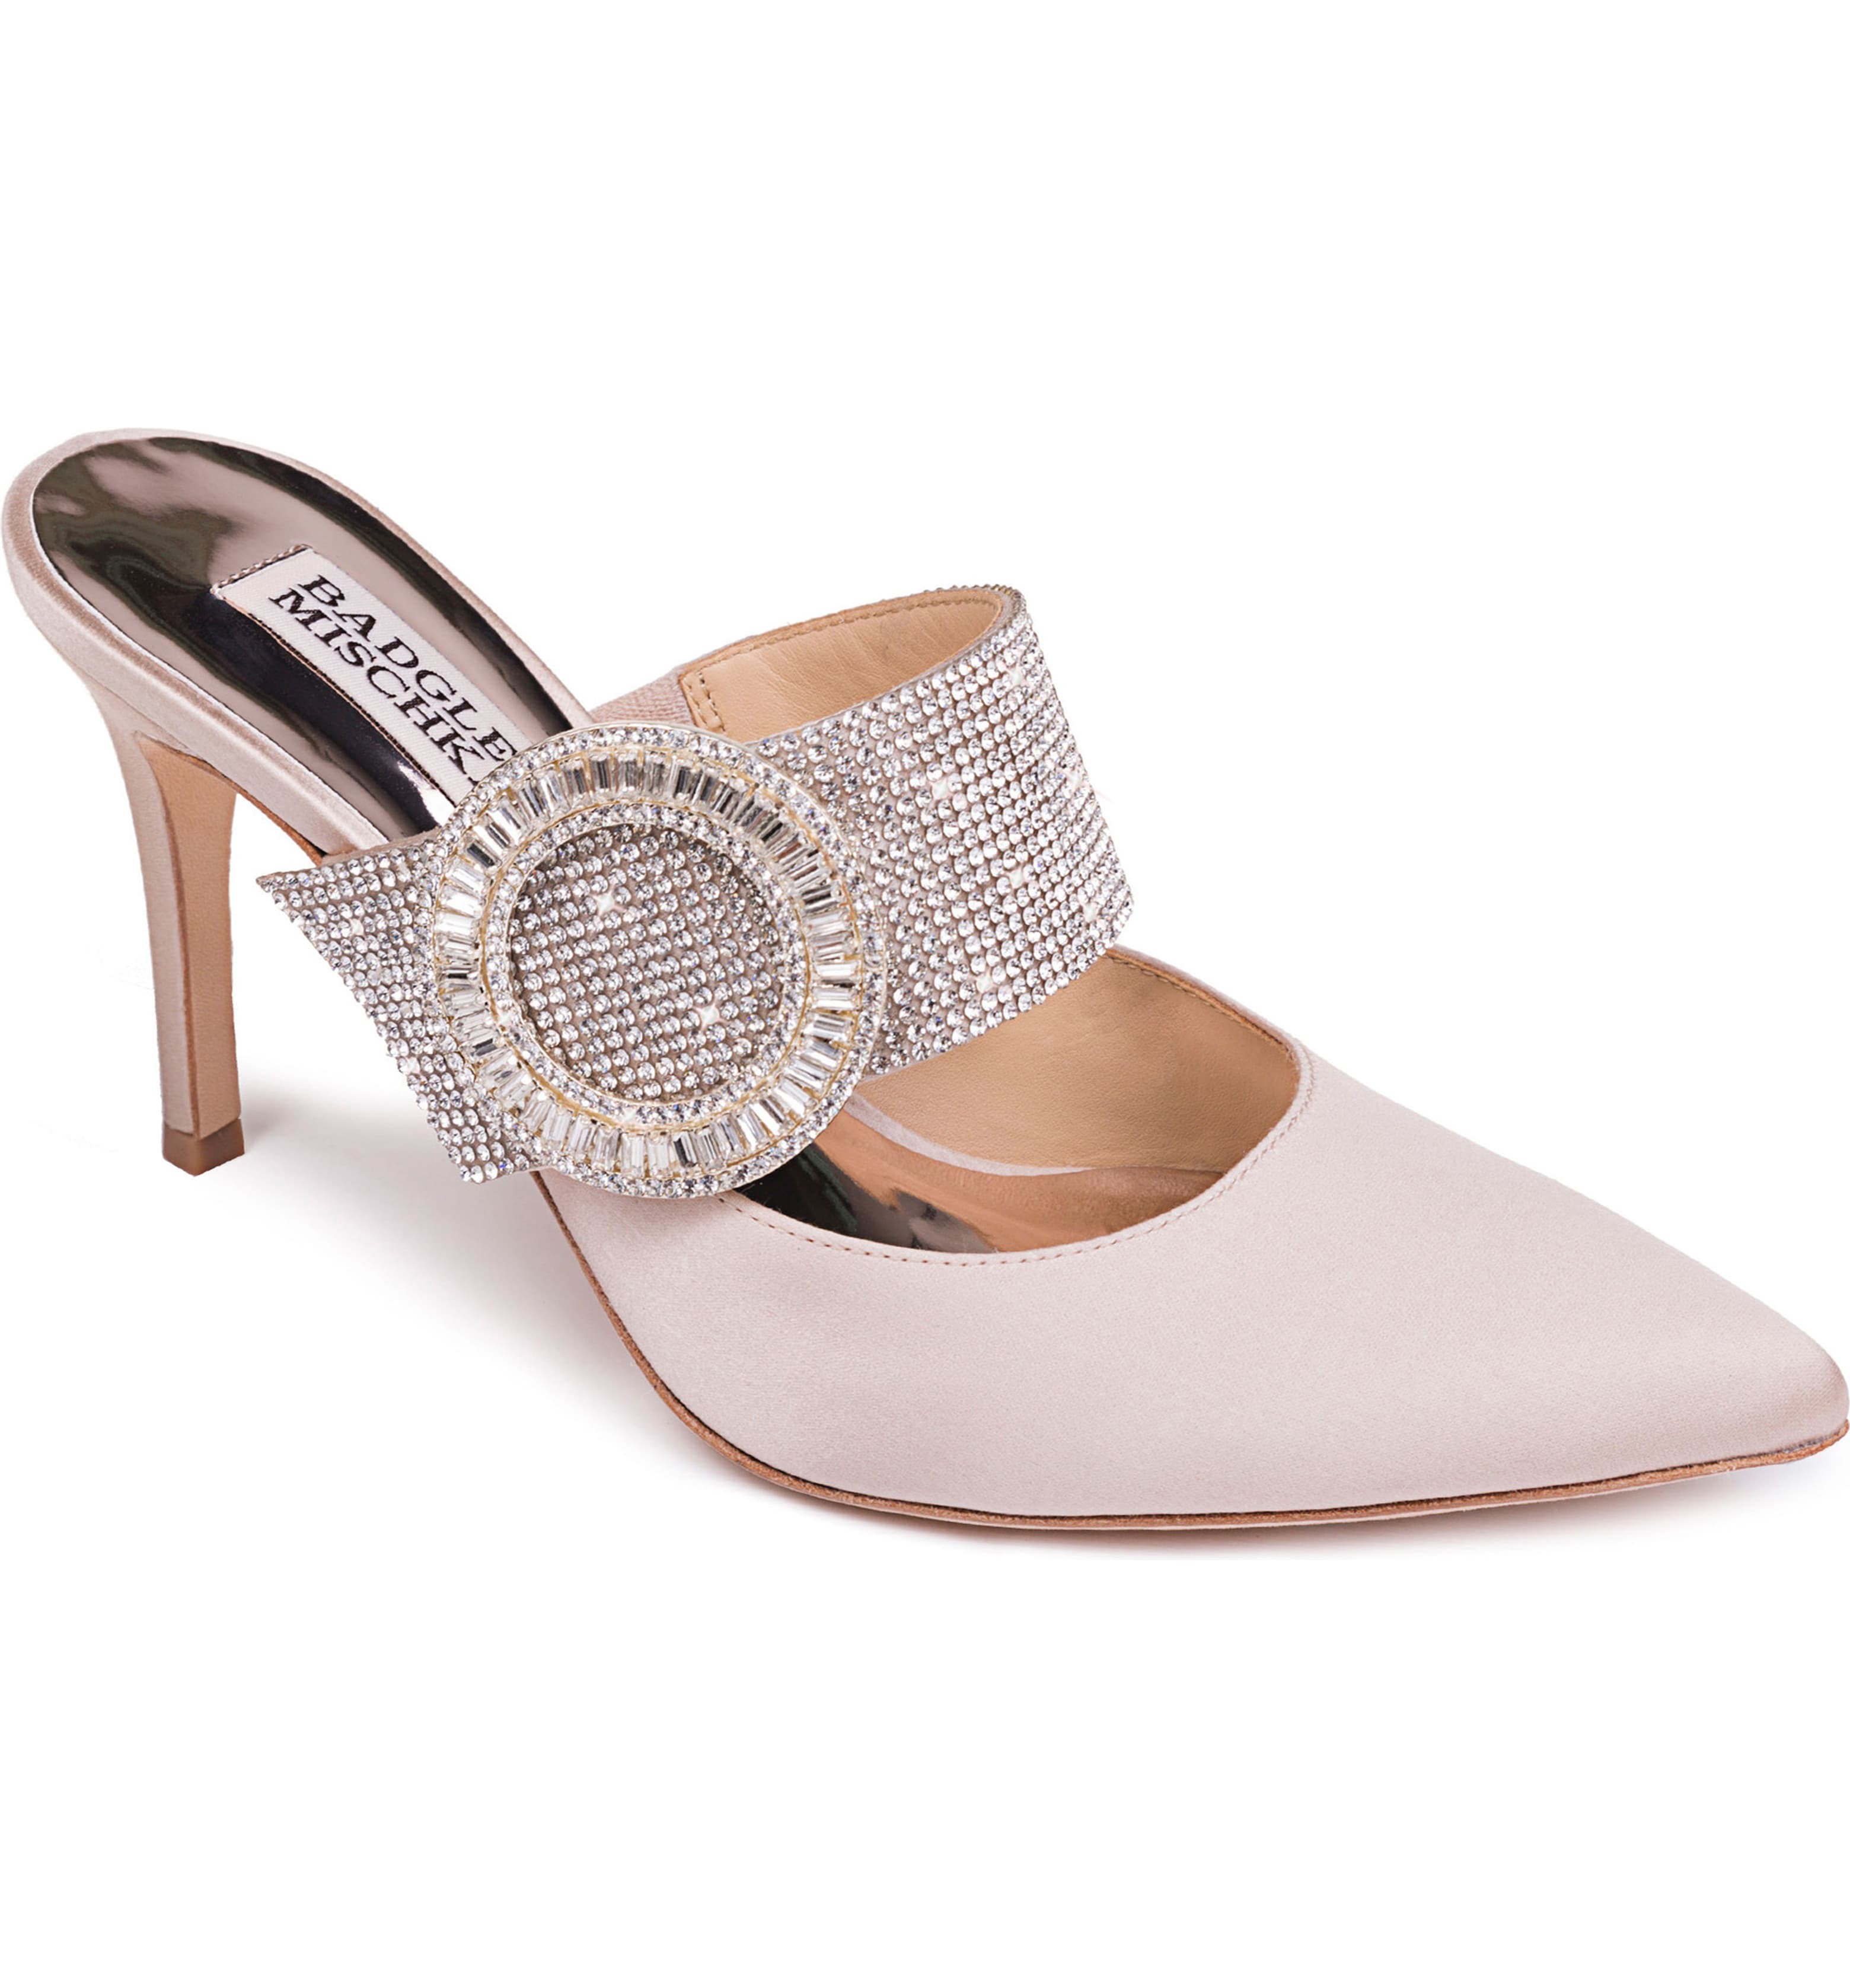 comfortable wedding shoes for mother of bride